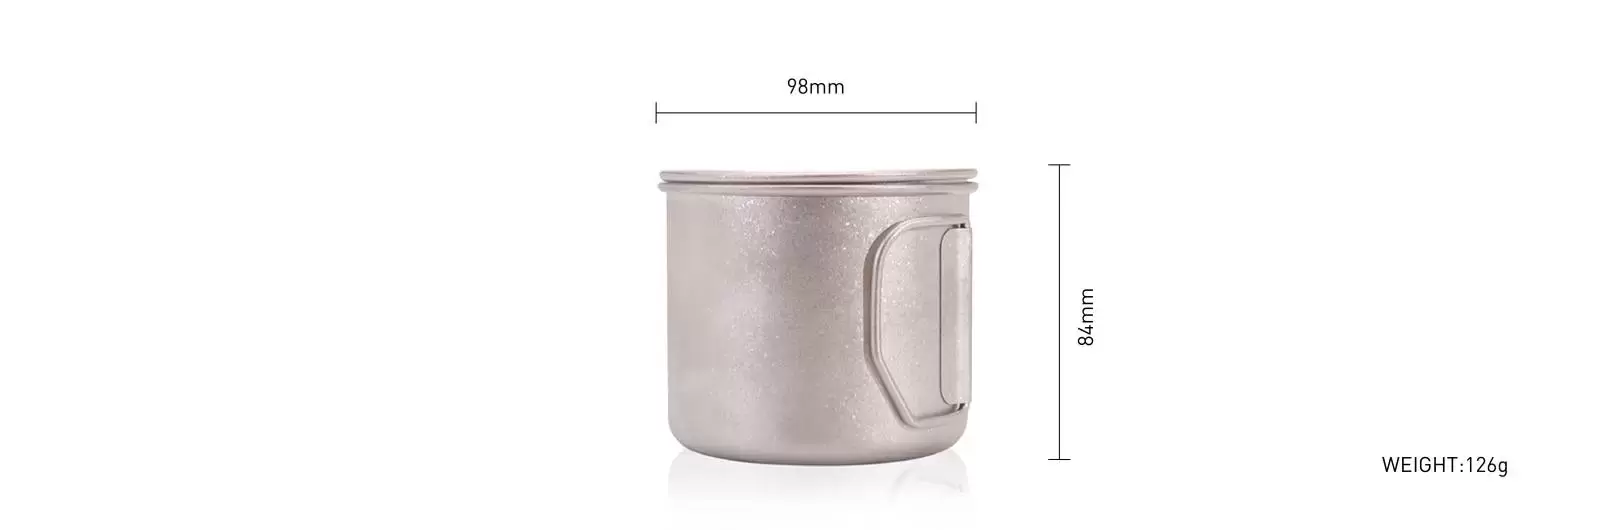 details of 500ML Folding Portable Outdoor Titanium Crystal Cup mug camping for hiking & camping